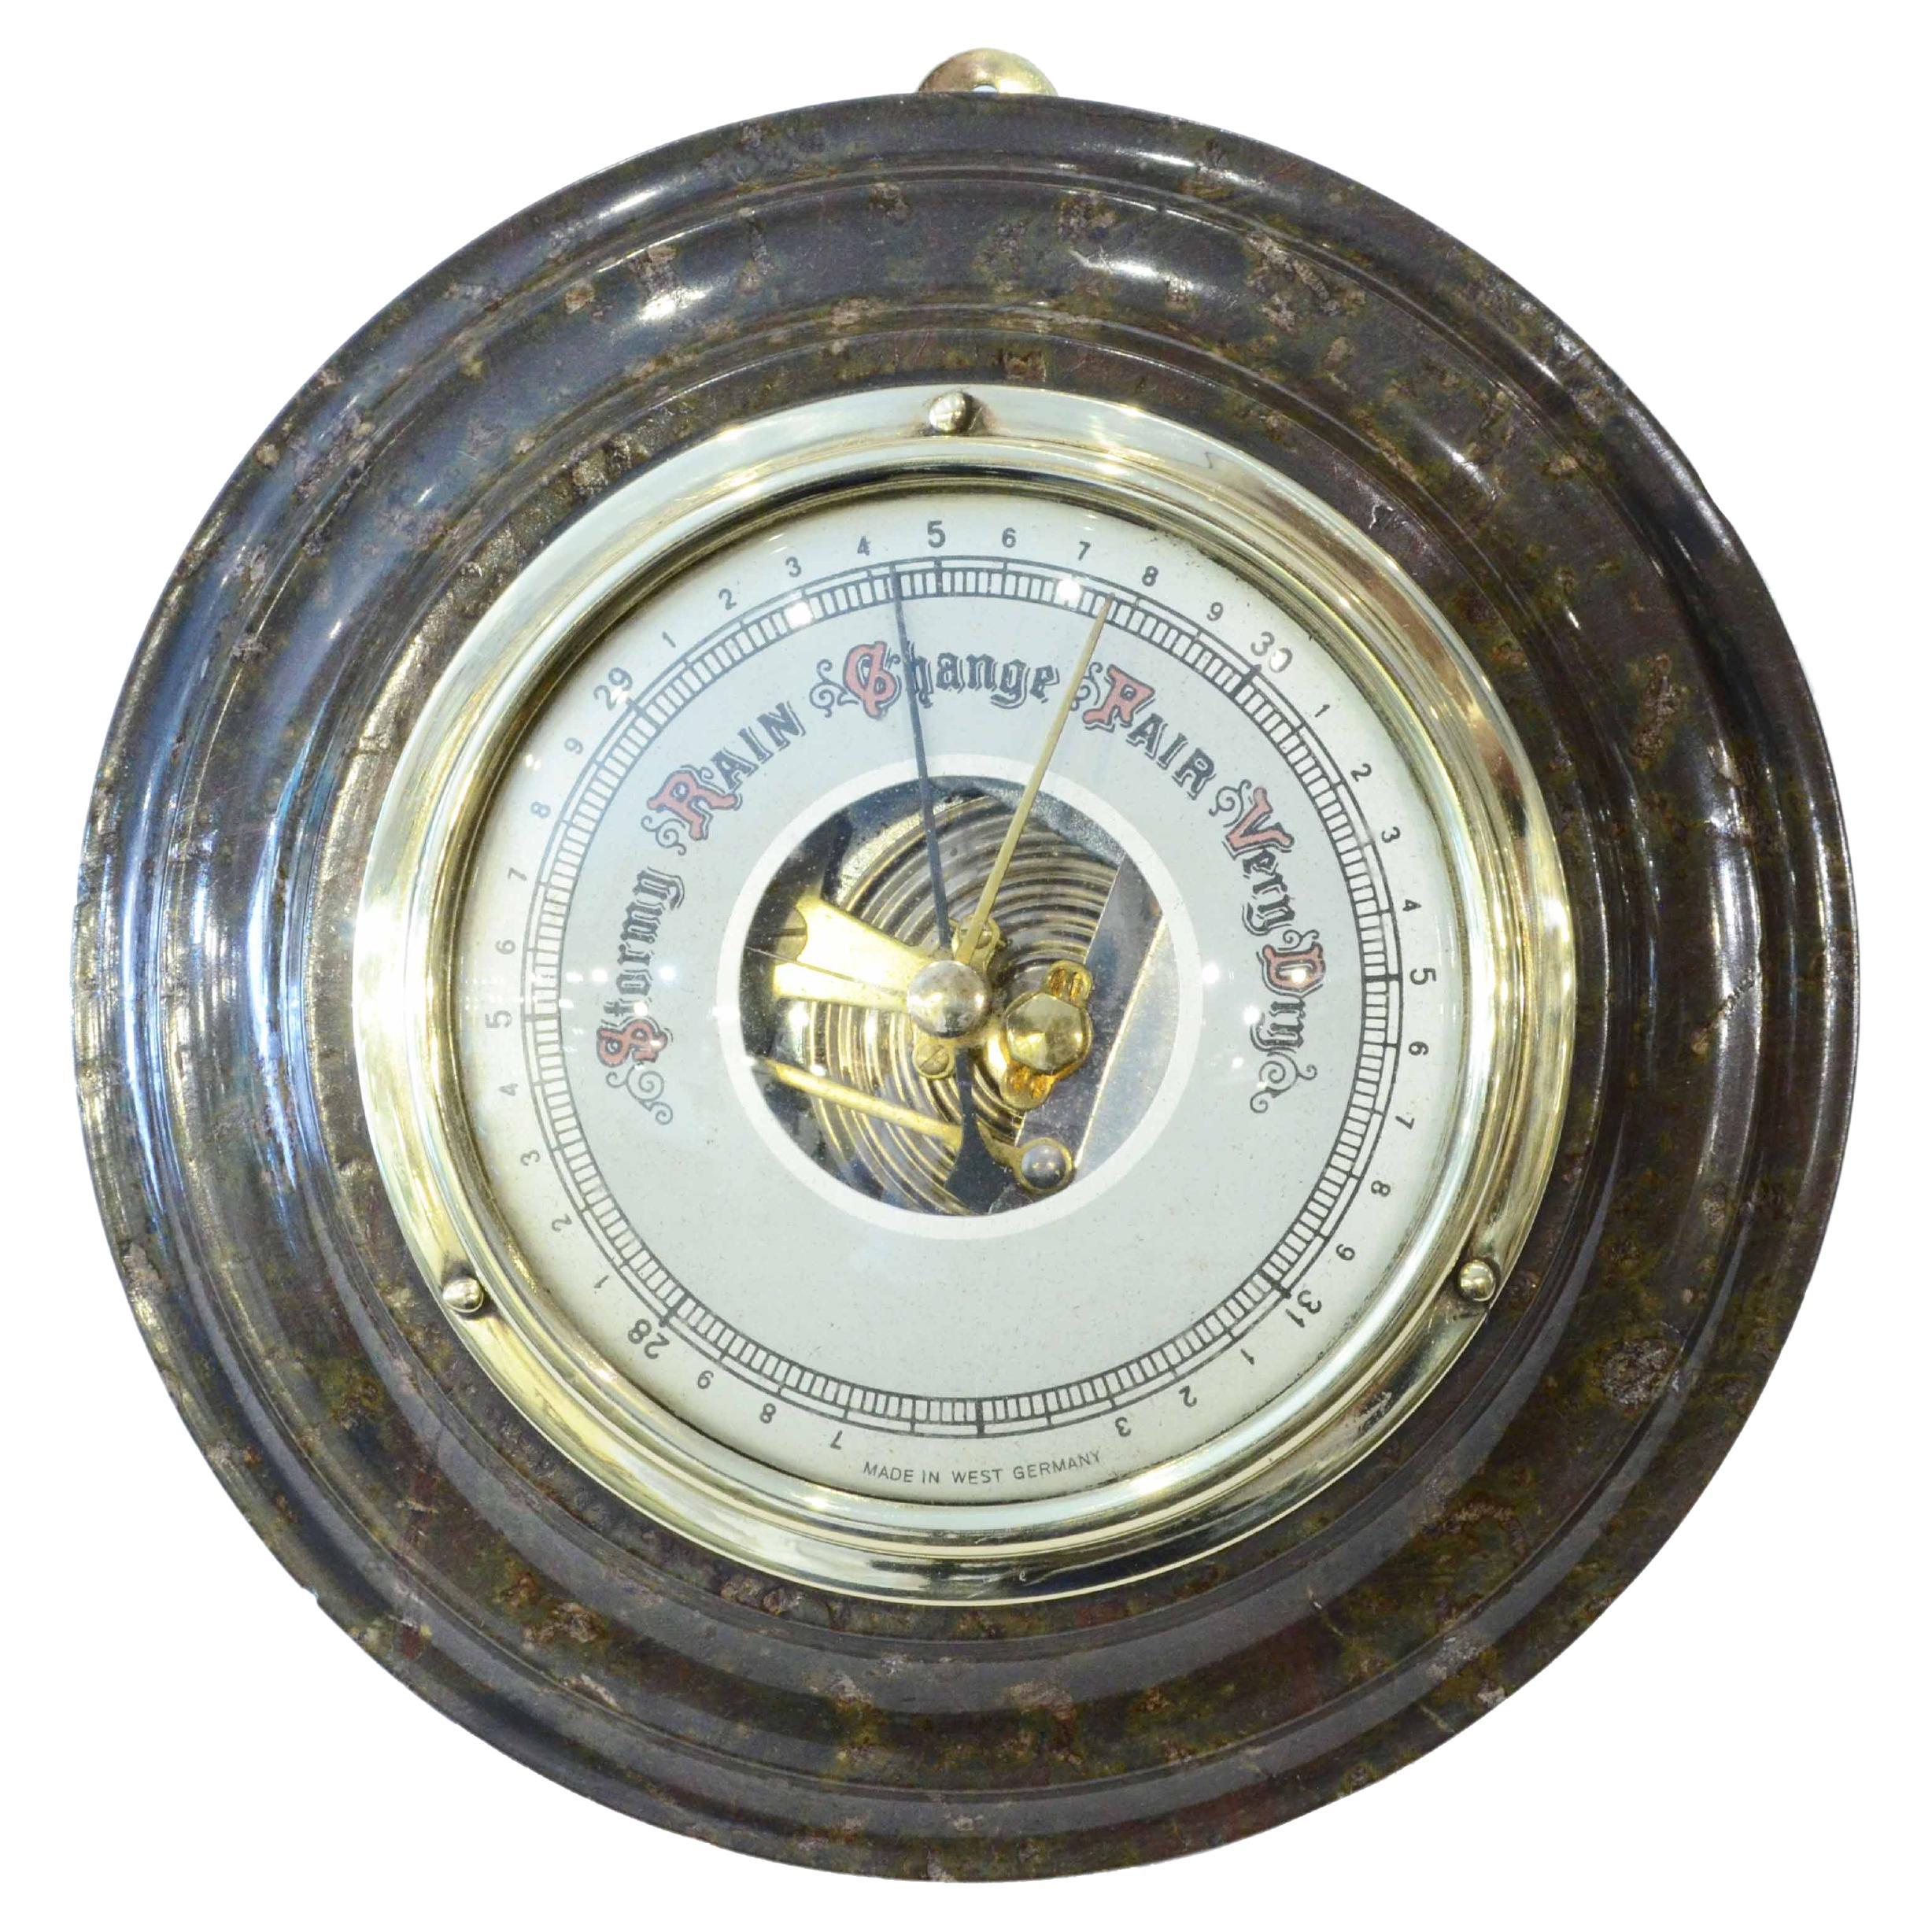 Antique German aneroid barometer from the early 1900s made of turned marble.